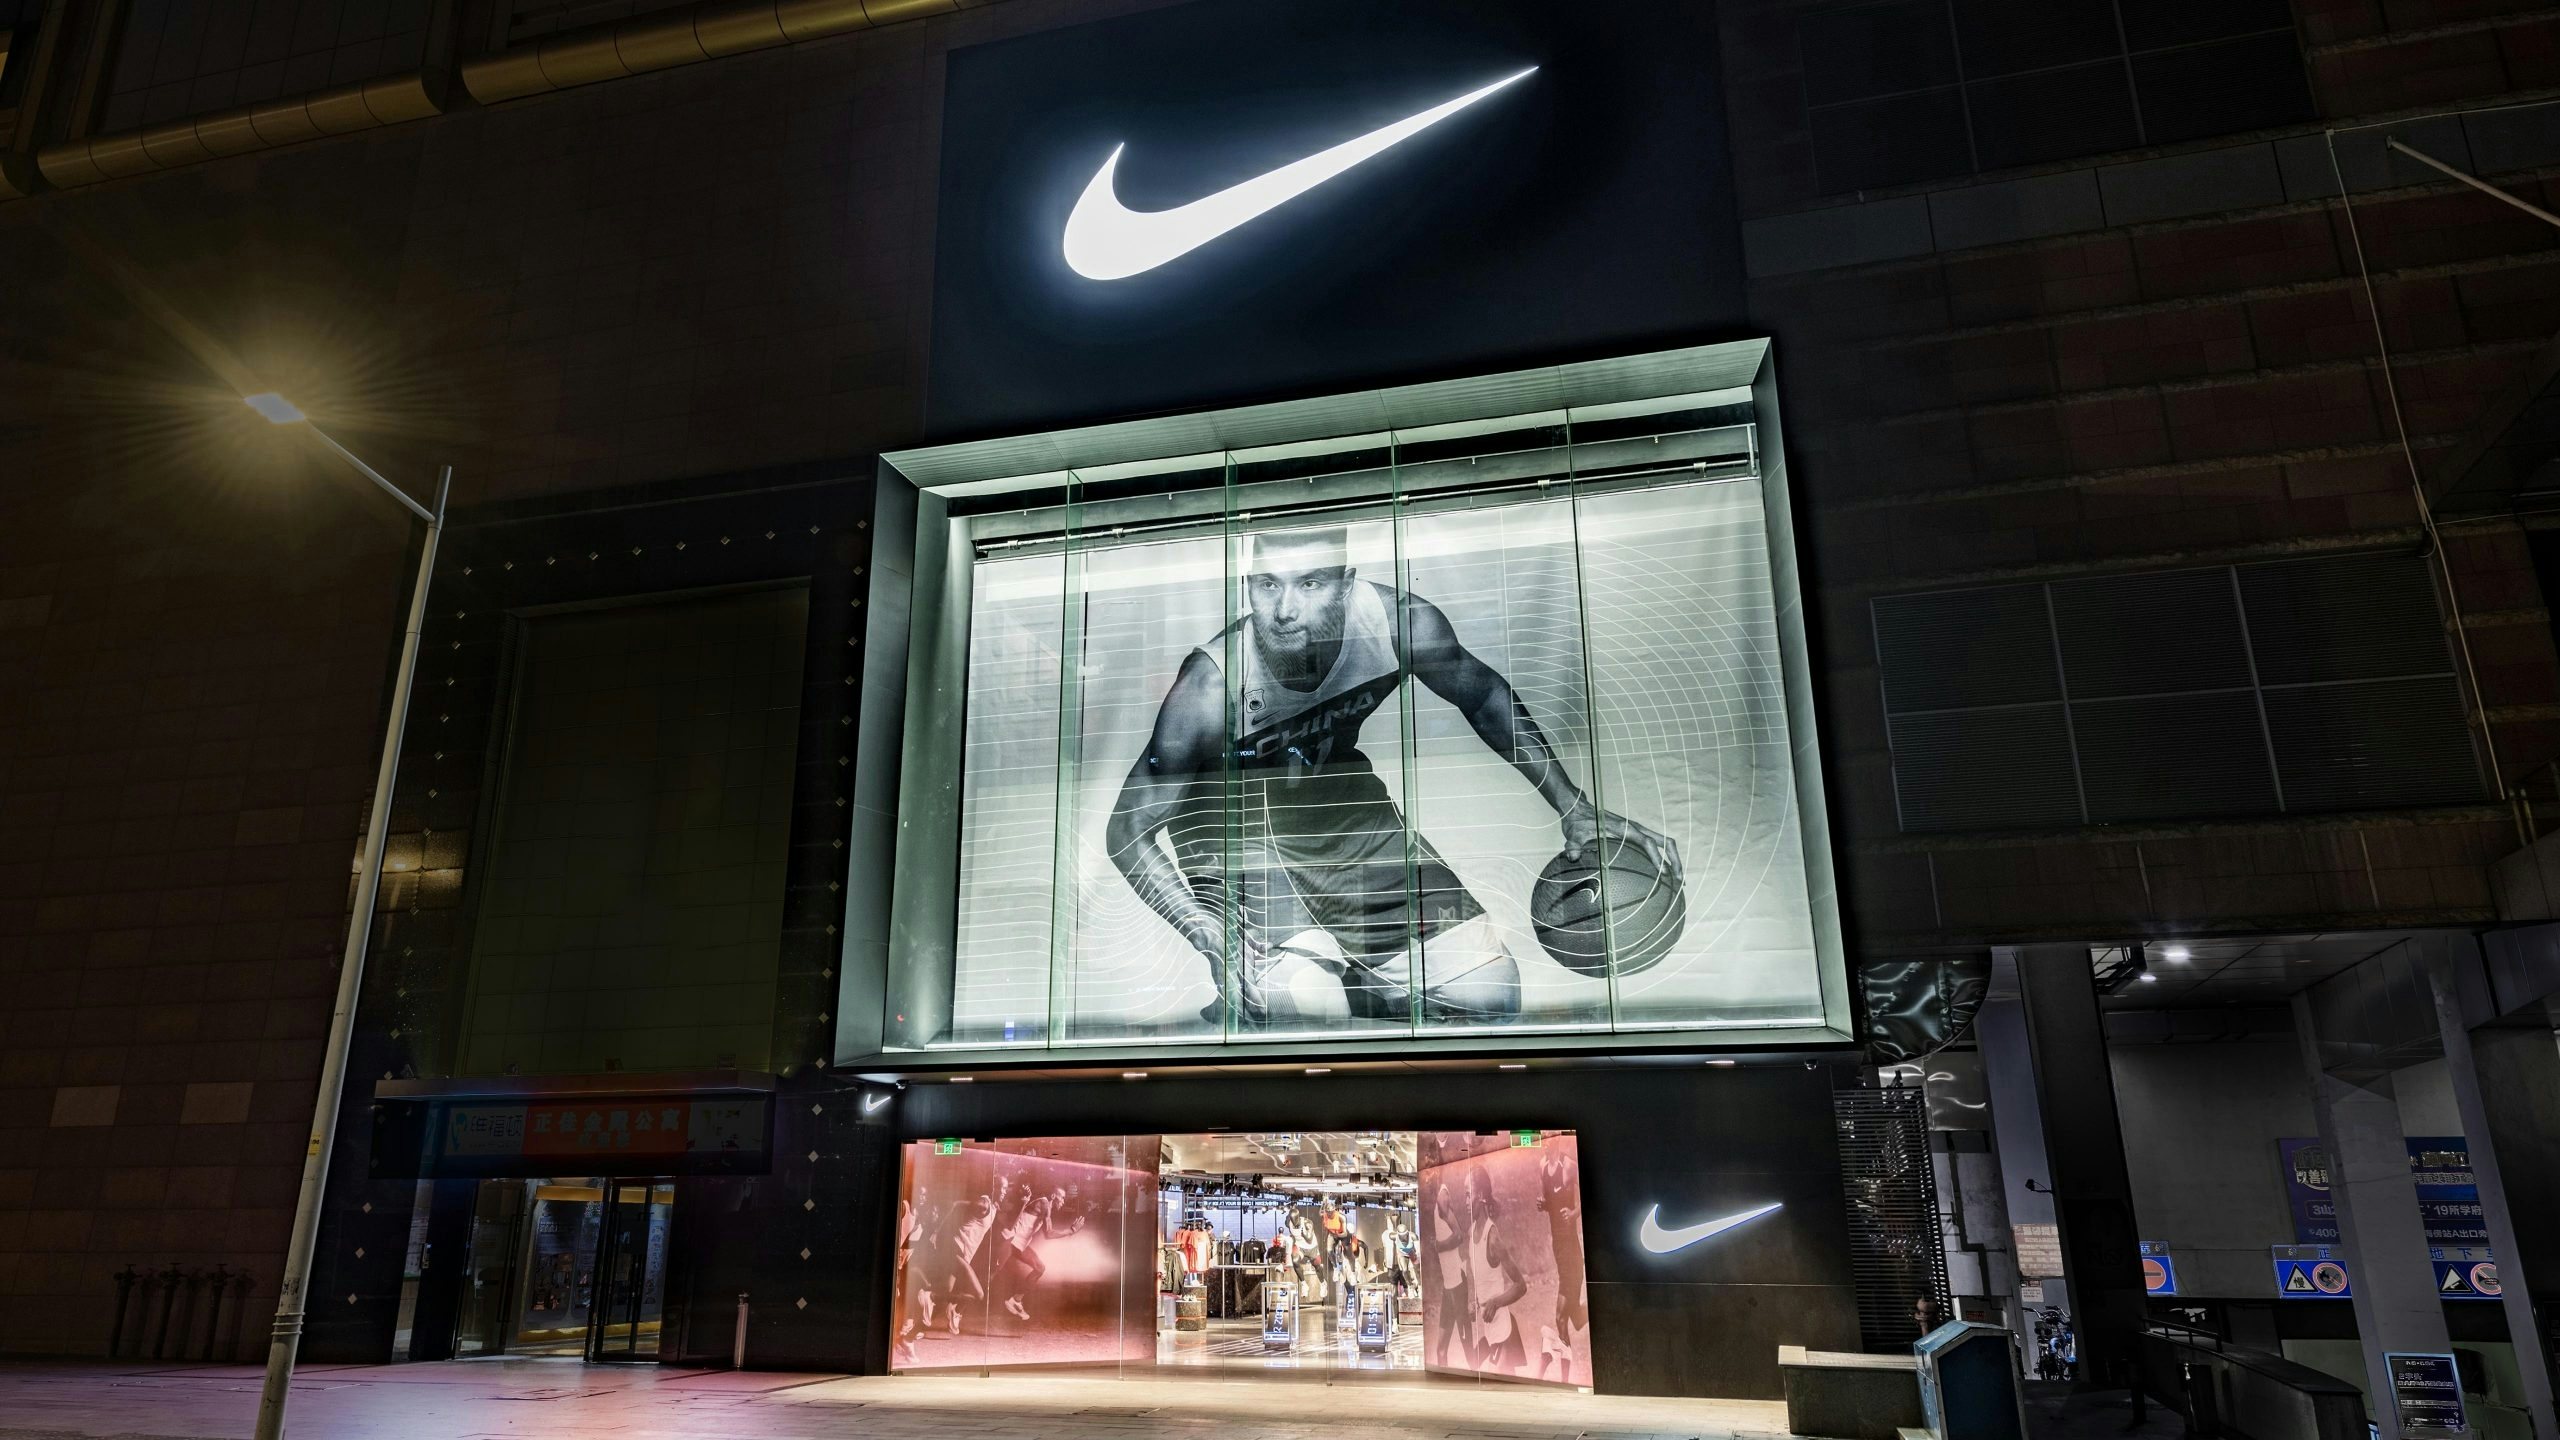 China will soon become the first country to sell most of its retail online. So what is the point of a physical store post-pandemic? Photo: Courtesy of Nike